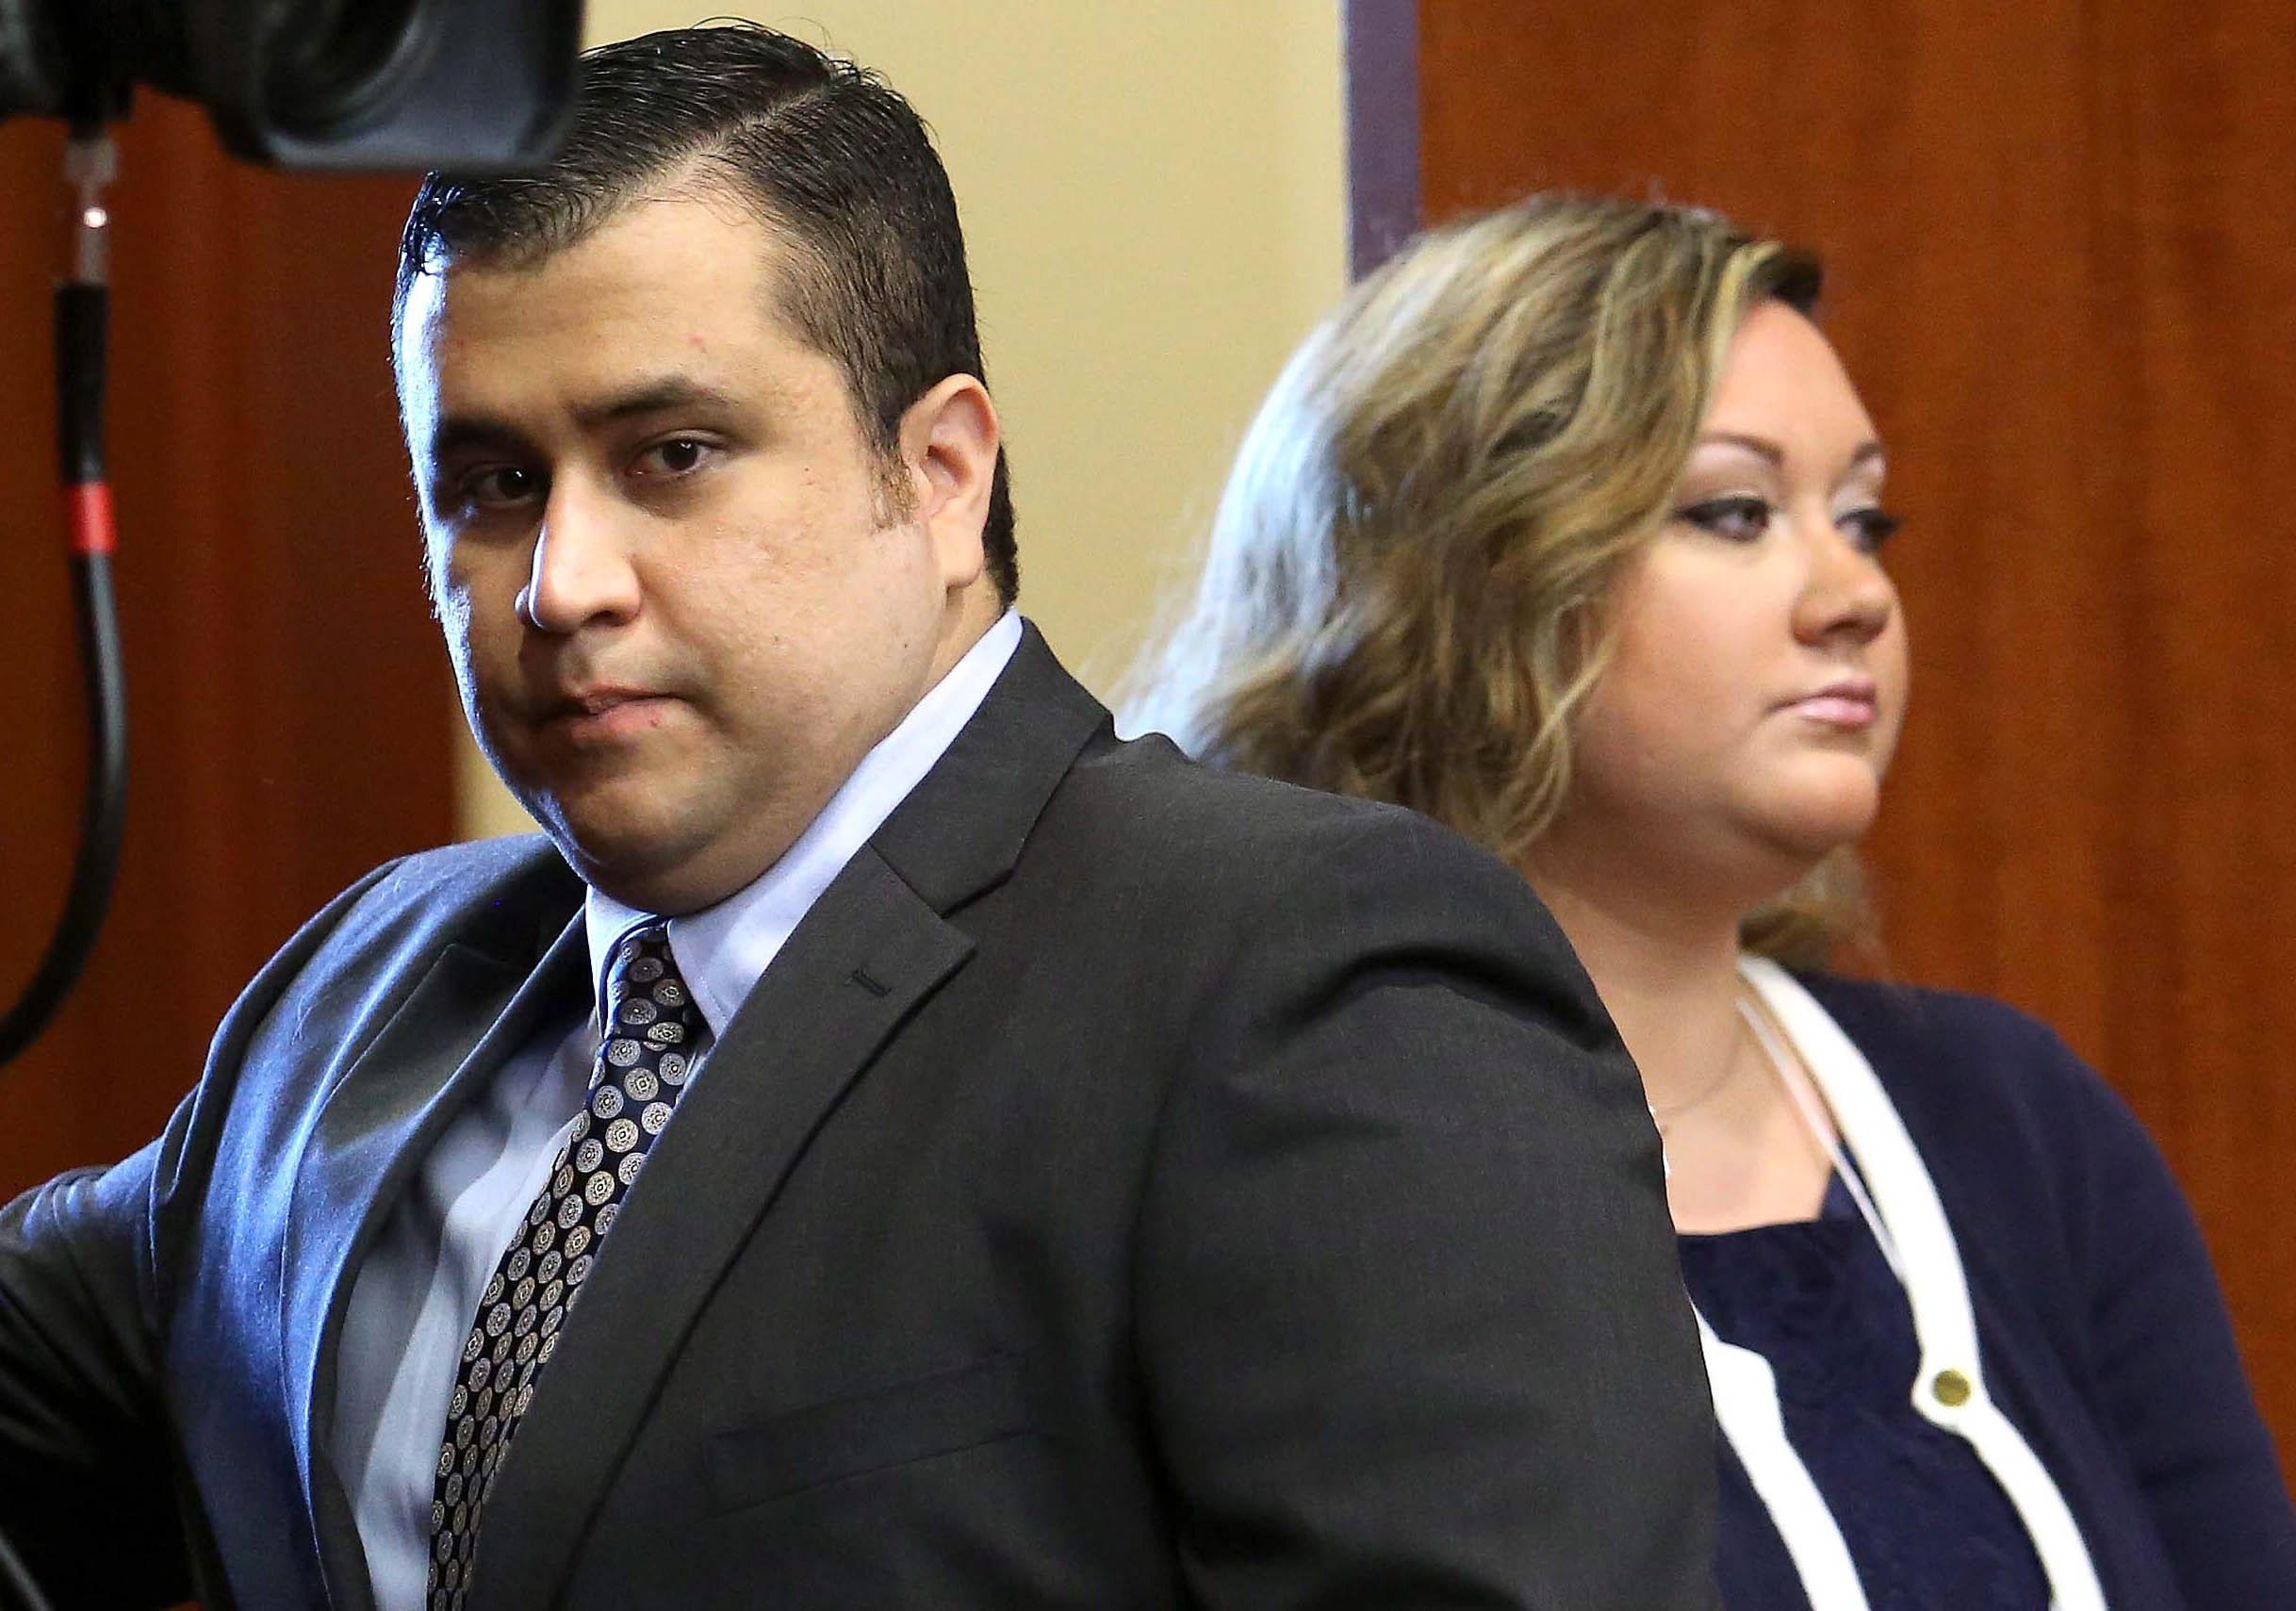 George Zimmerman, left, arrives in Seminole circuit court, with his wife Shellie, in Sanford, Fla., earlier this summer.